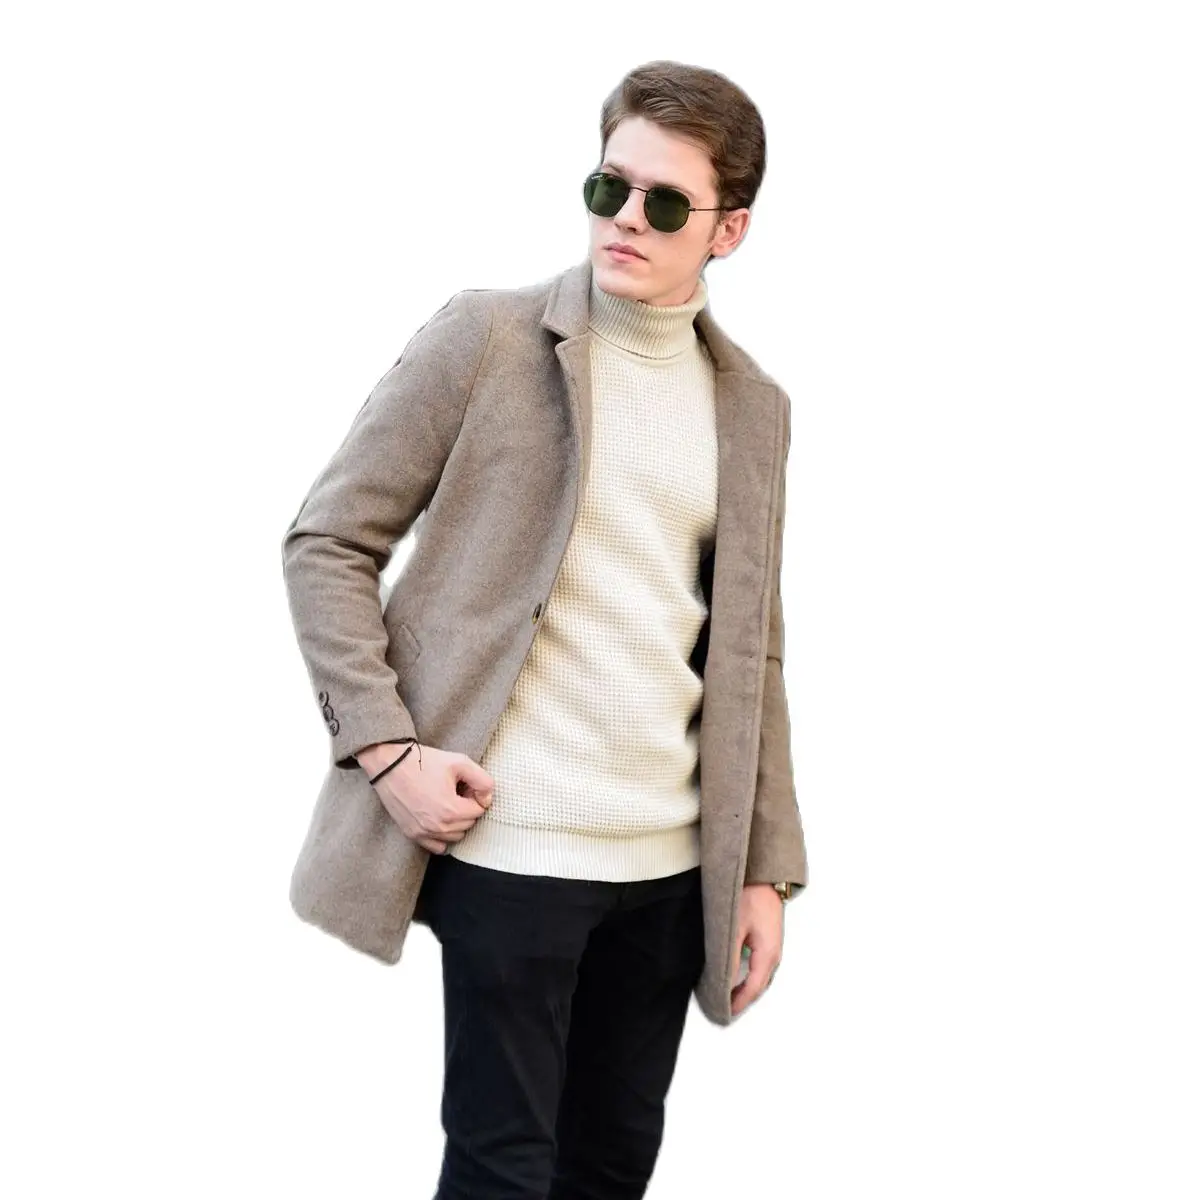 Men's Beige Color Cachet Jacket 2021 Autumn Winter Season Outwear High Quality SlimFit Young Style With Front Button Closure